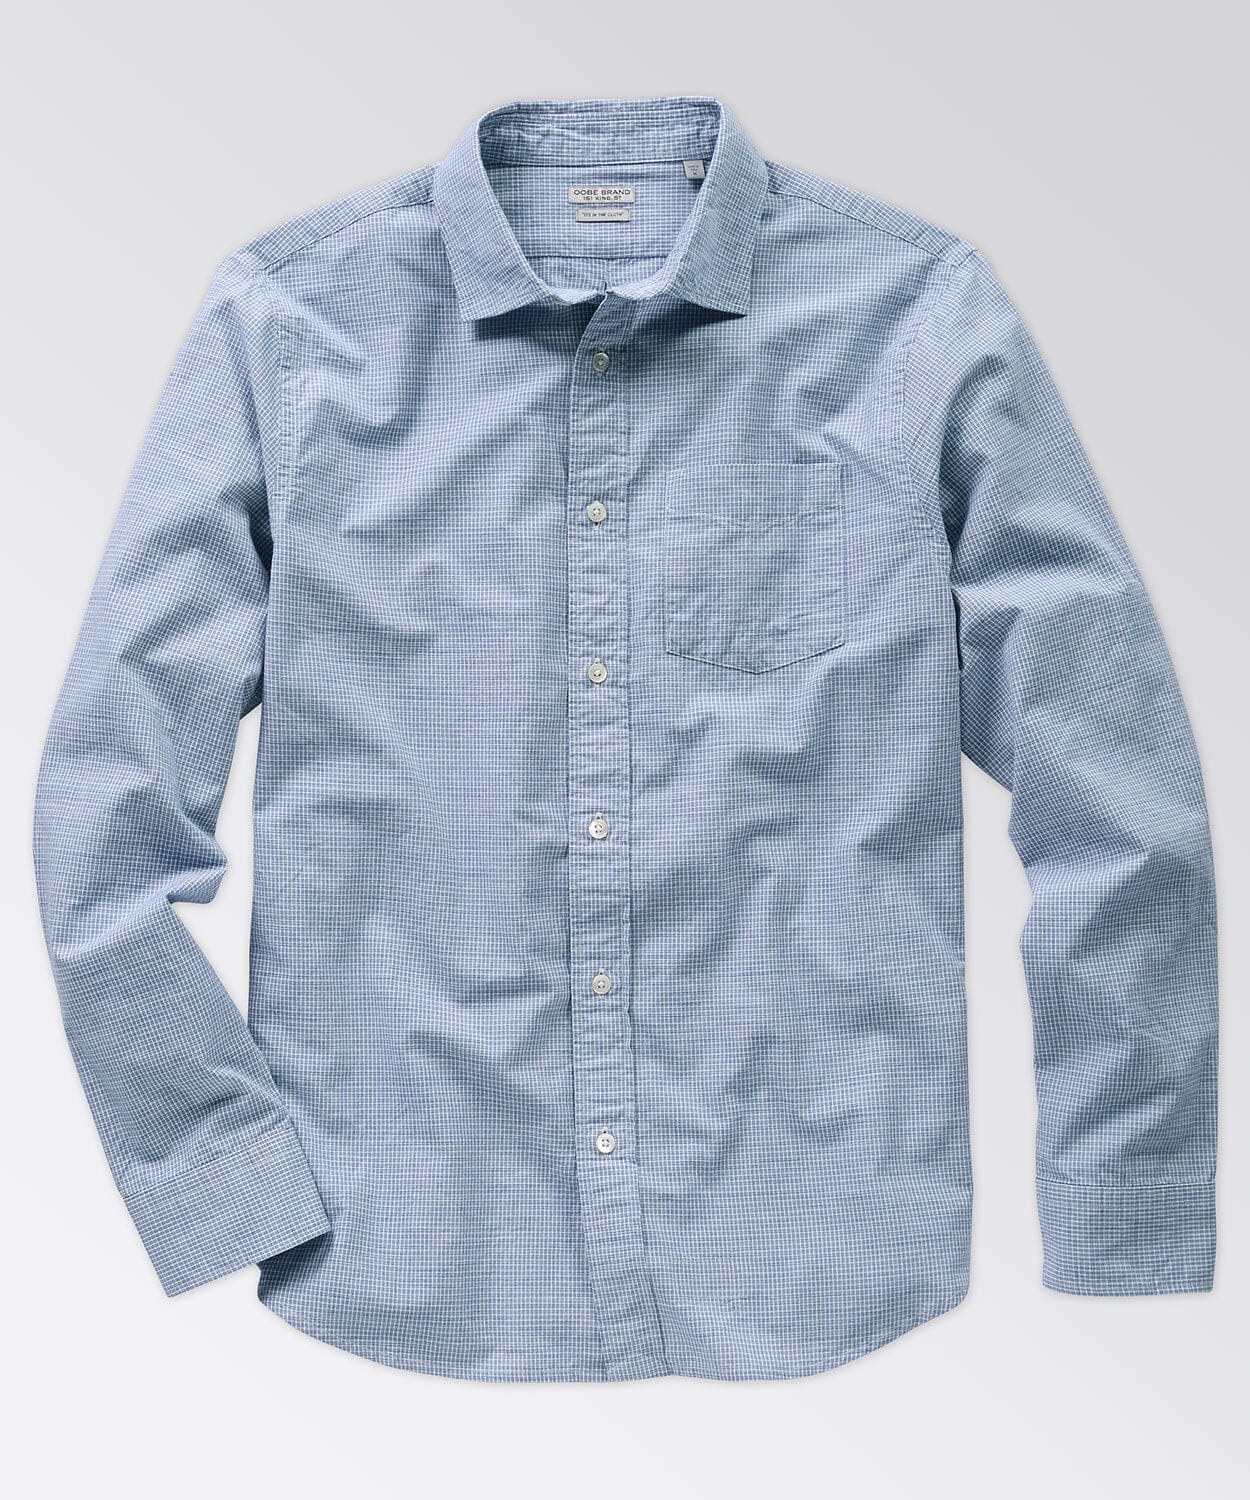 Excella Shirt Button Downs OOBE BRAND Navy White S 